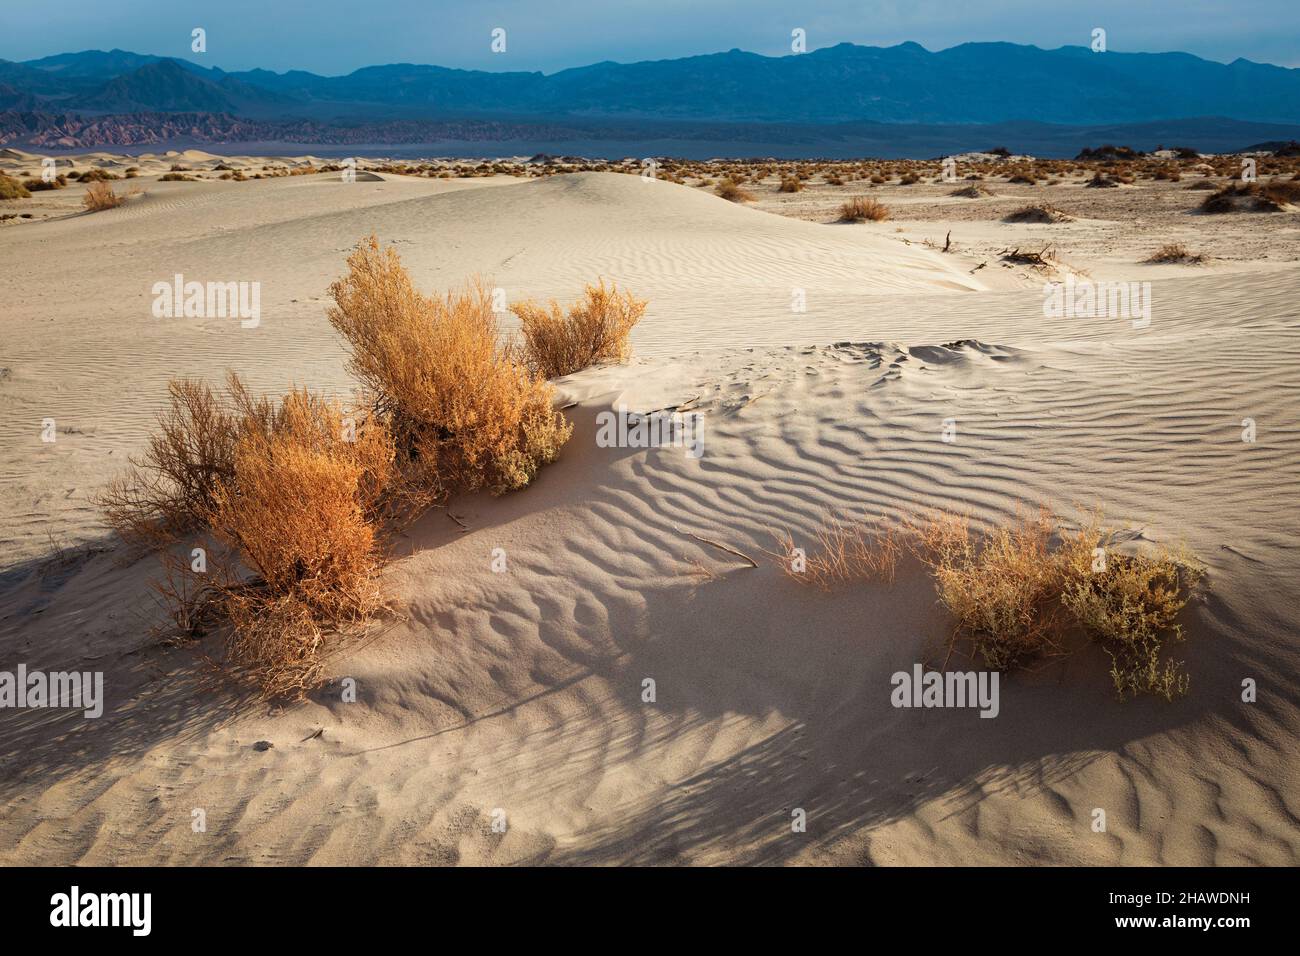 The Mesquite Flat Sand Dunes in Death Valley, California support little life due to the heat and lack of rain. Stock Photo